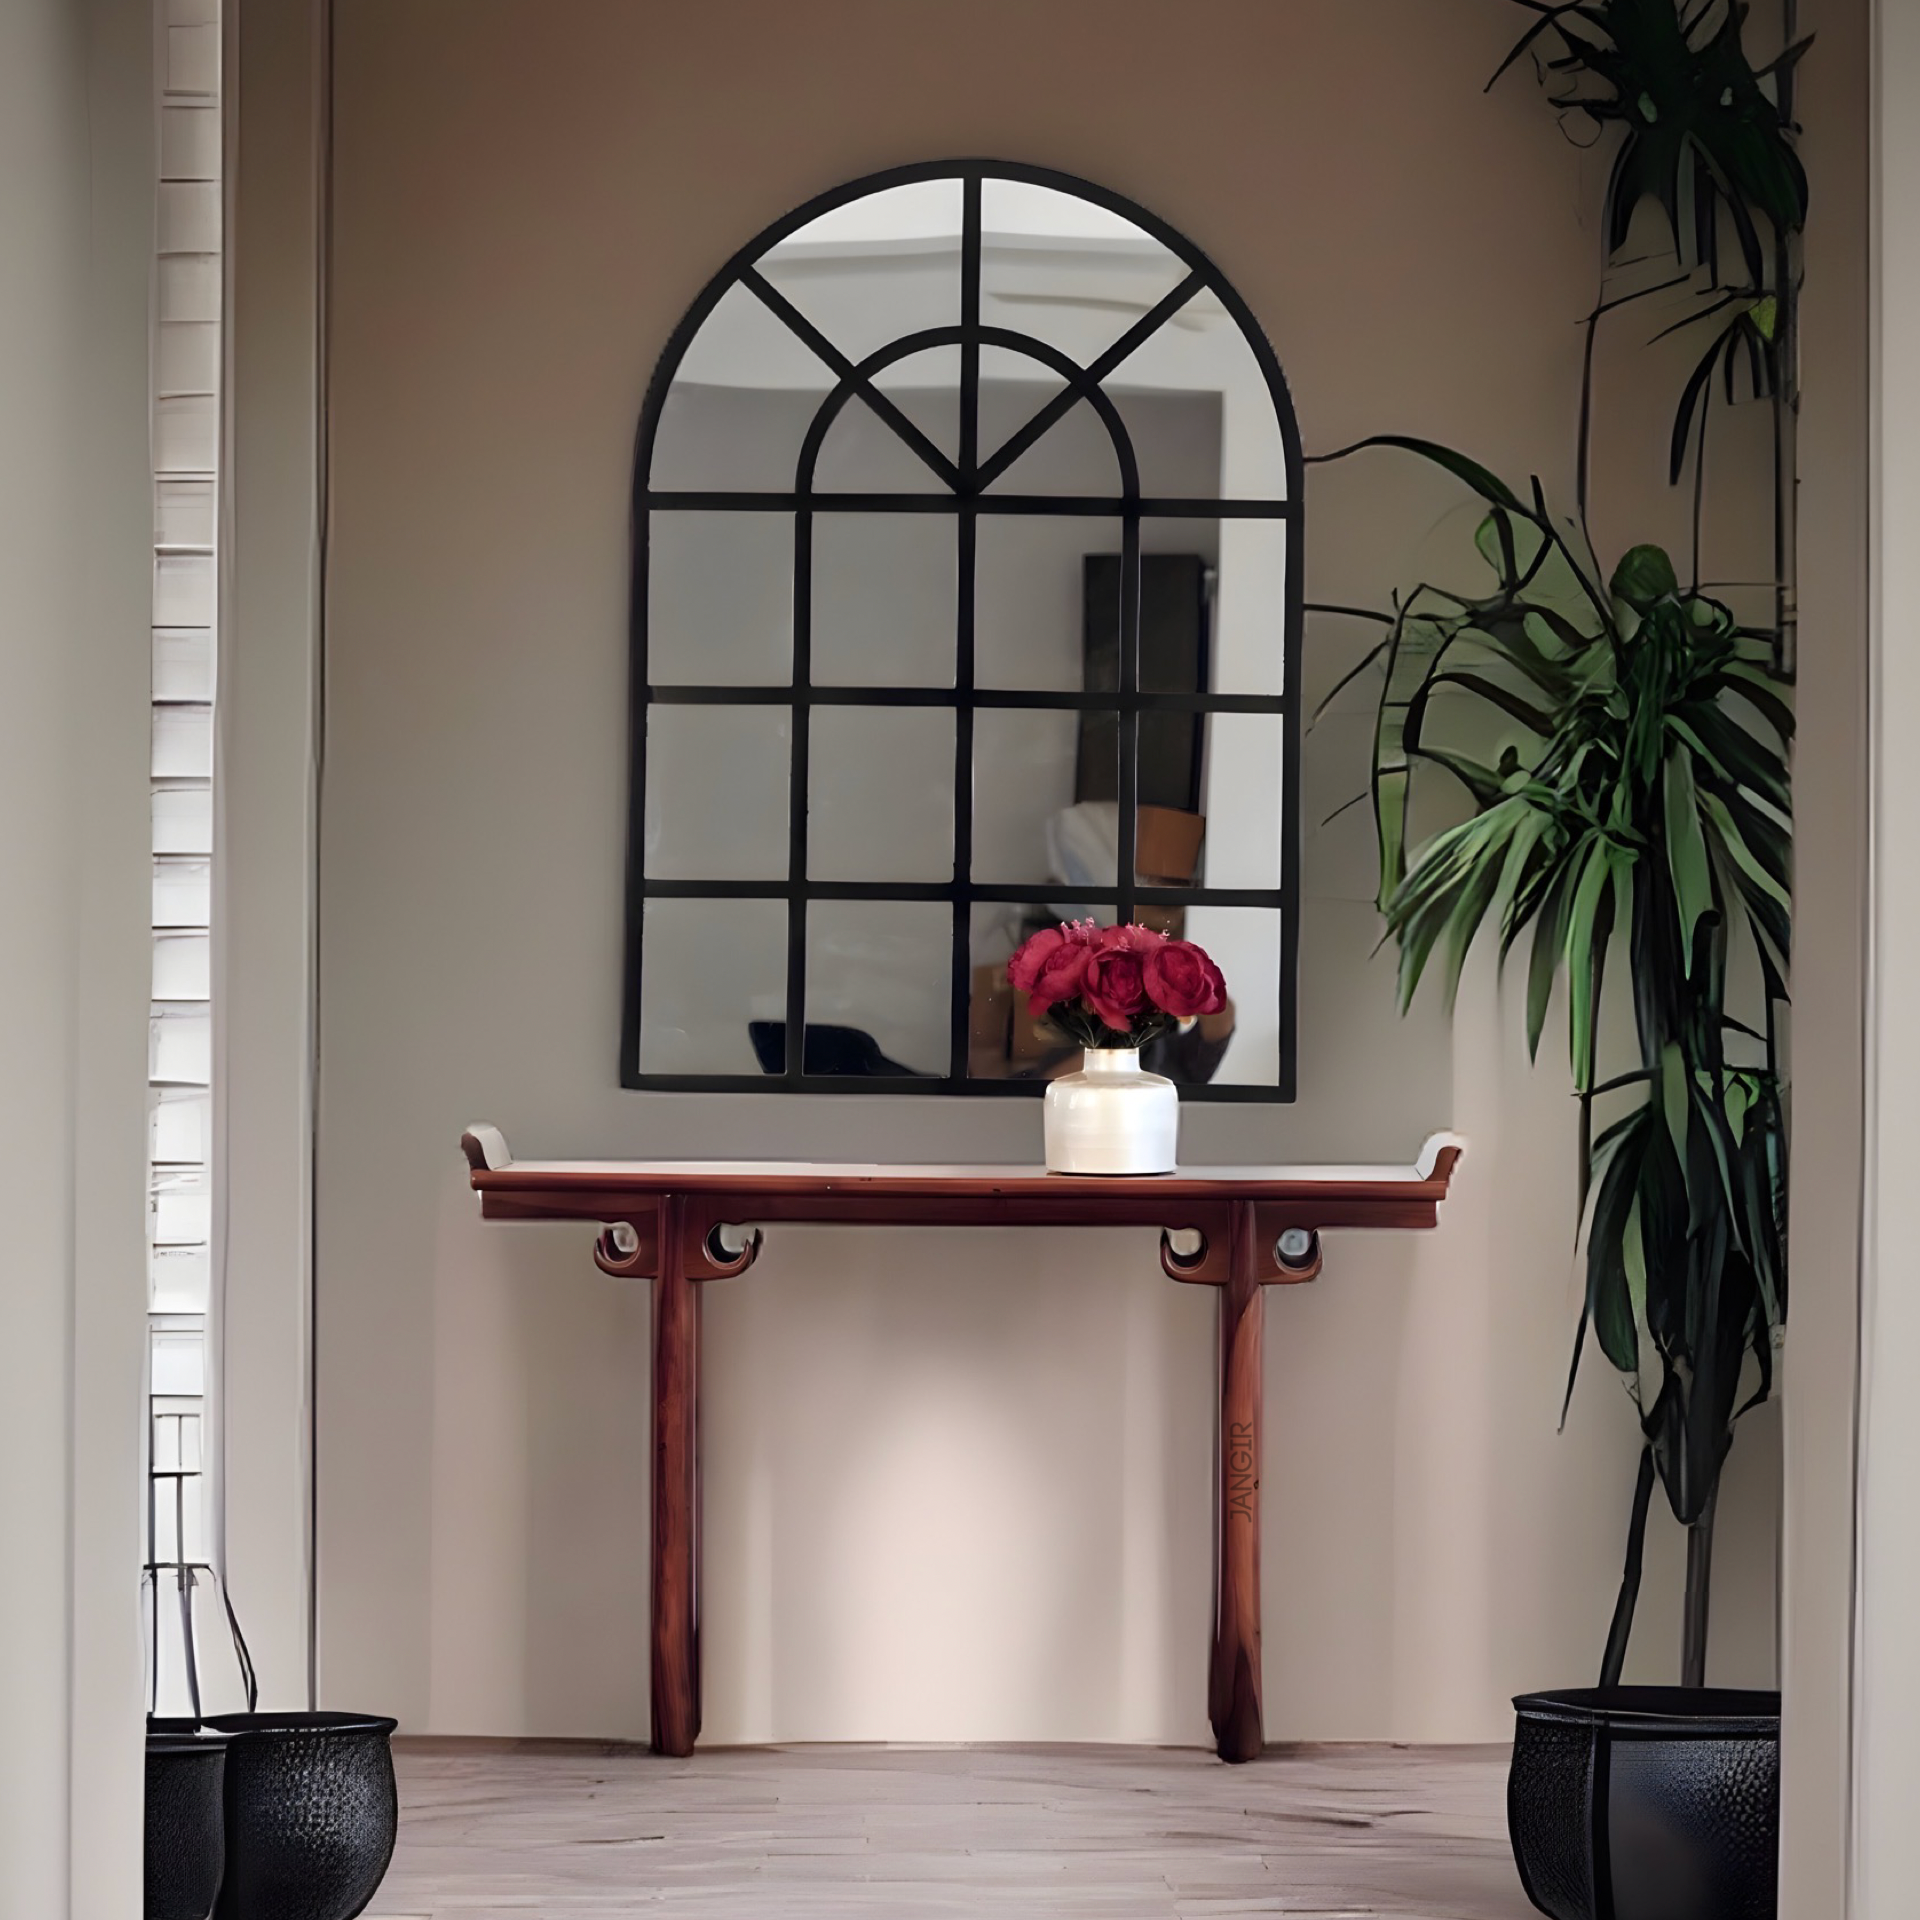 Complete your home's grand entrance with our elegant entryway table at our online store, crafted from sheesham wood, this entryway table is ideal for any hallway or foyer. Upgrade your space now!